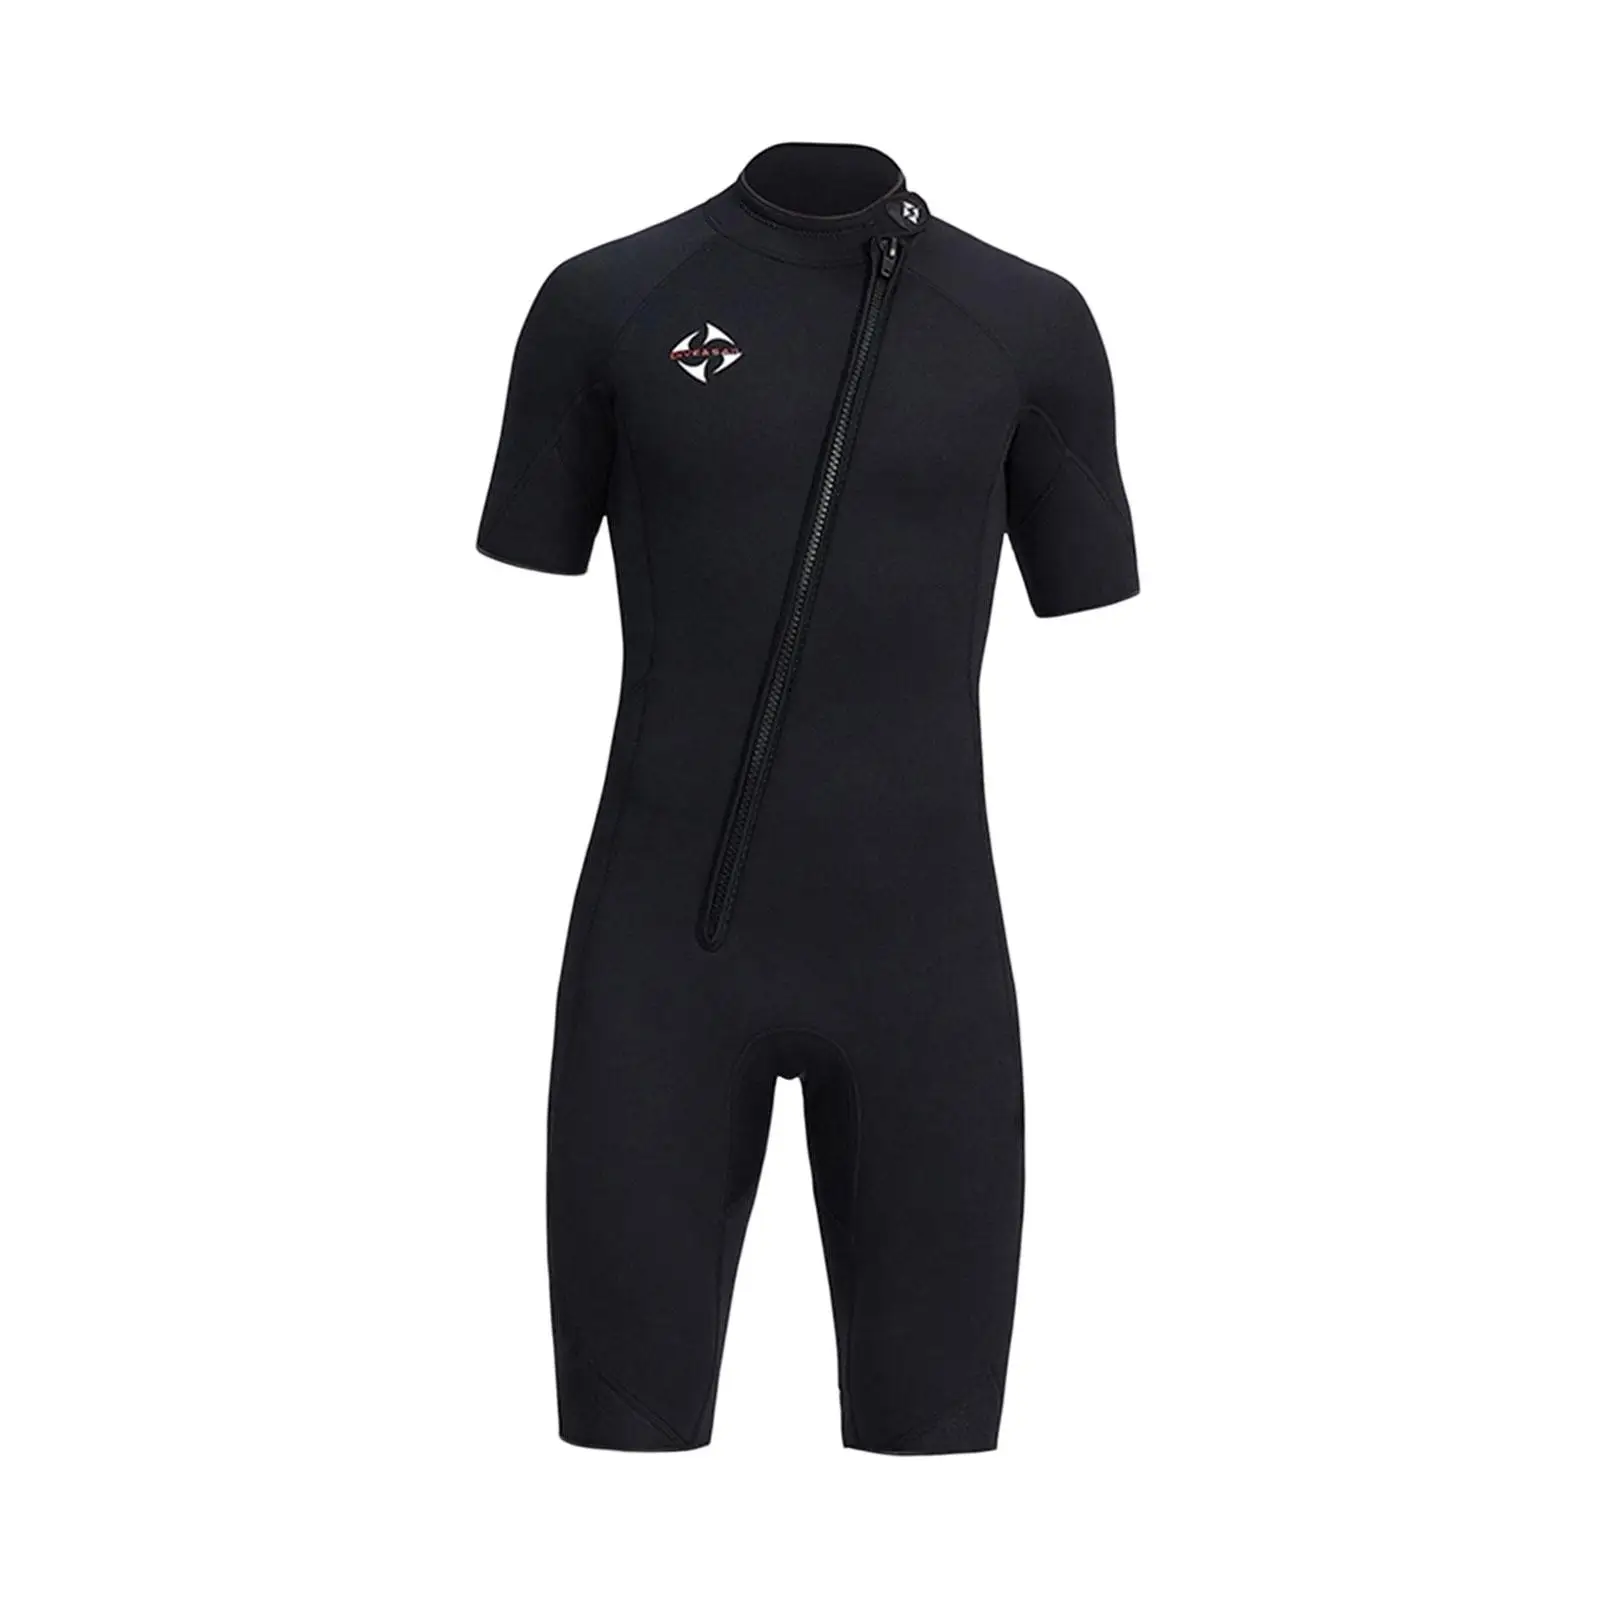 Men Wetsuit Diving Suit Short Sleeve Shorts Keep Warm for Surfing Diving